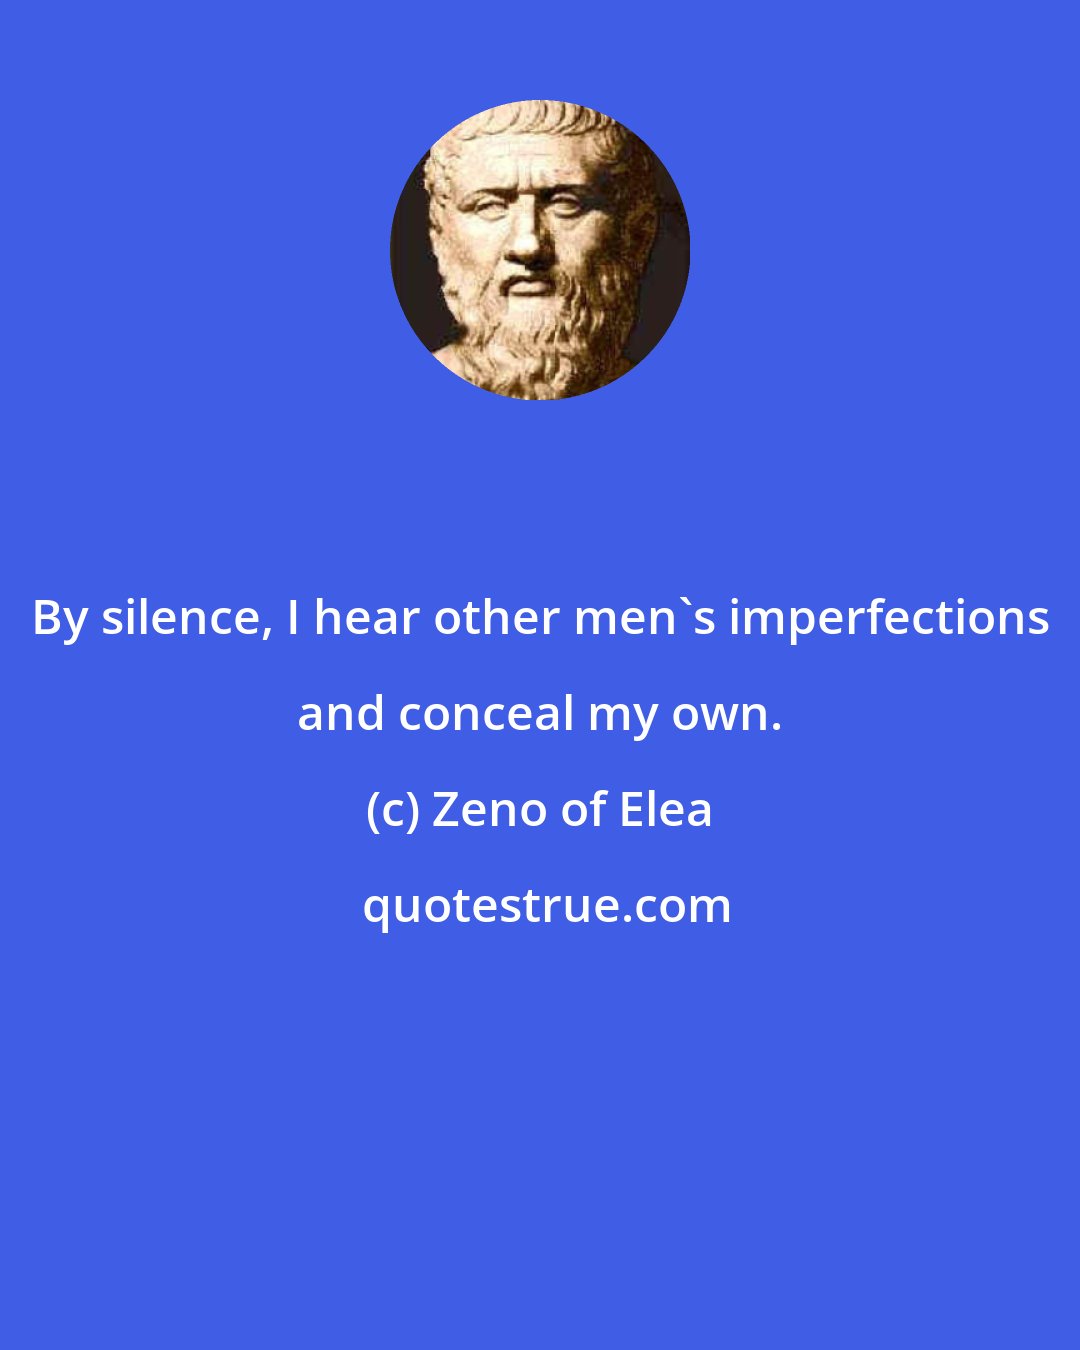 Zeno of Elea: By silence, I hear other men's imperfections and conceal my own.